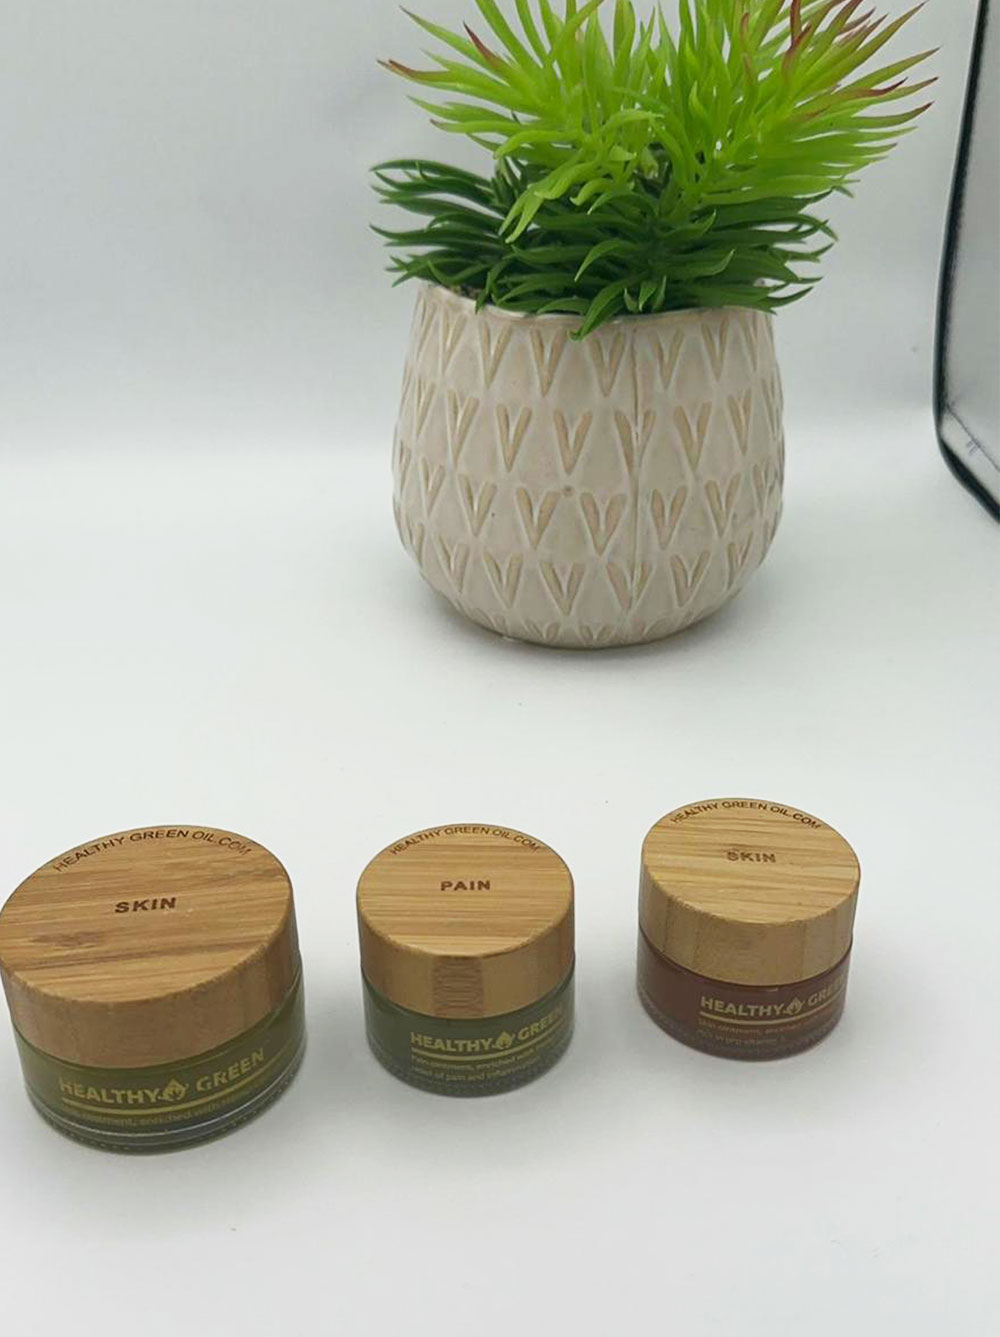 The Miracle CBD Ointment for the Skin